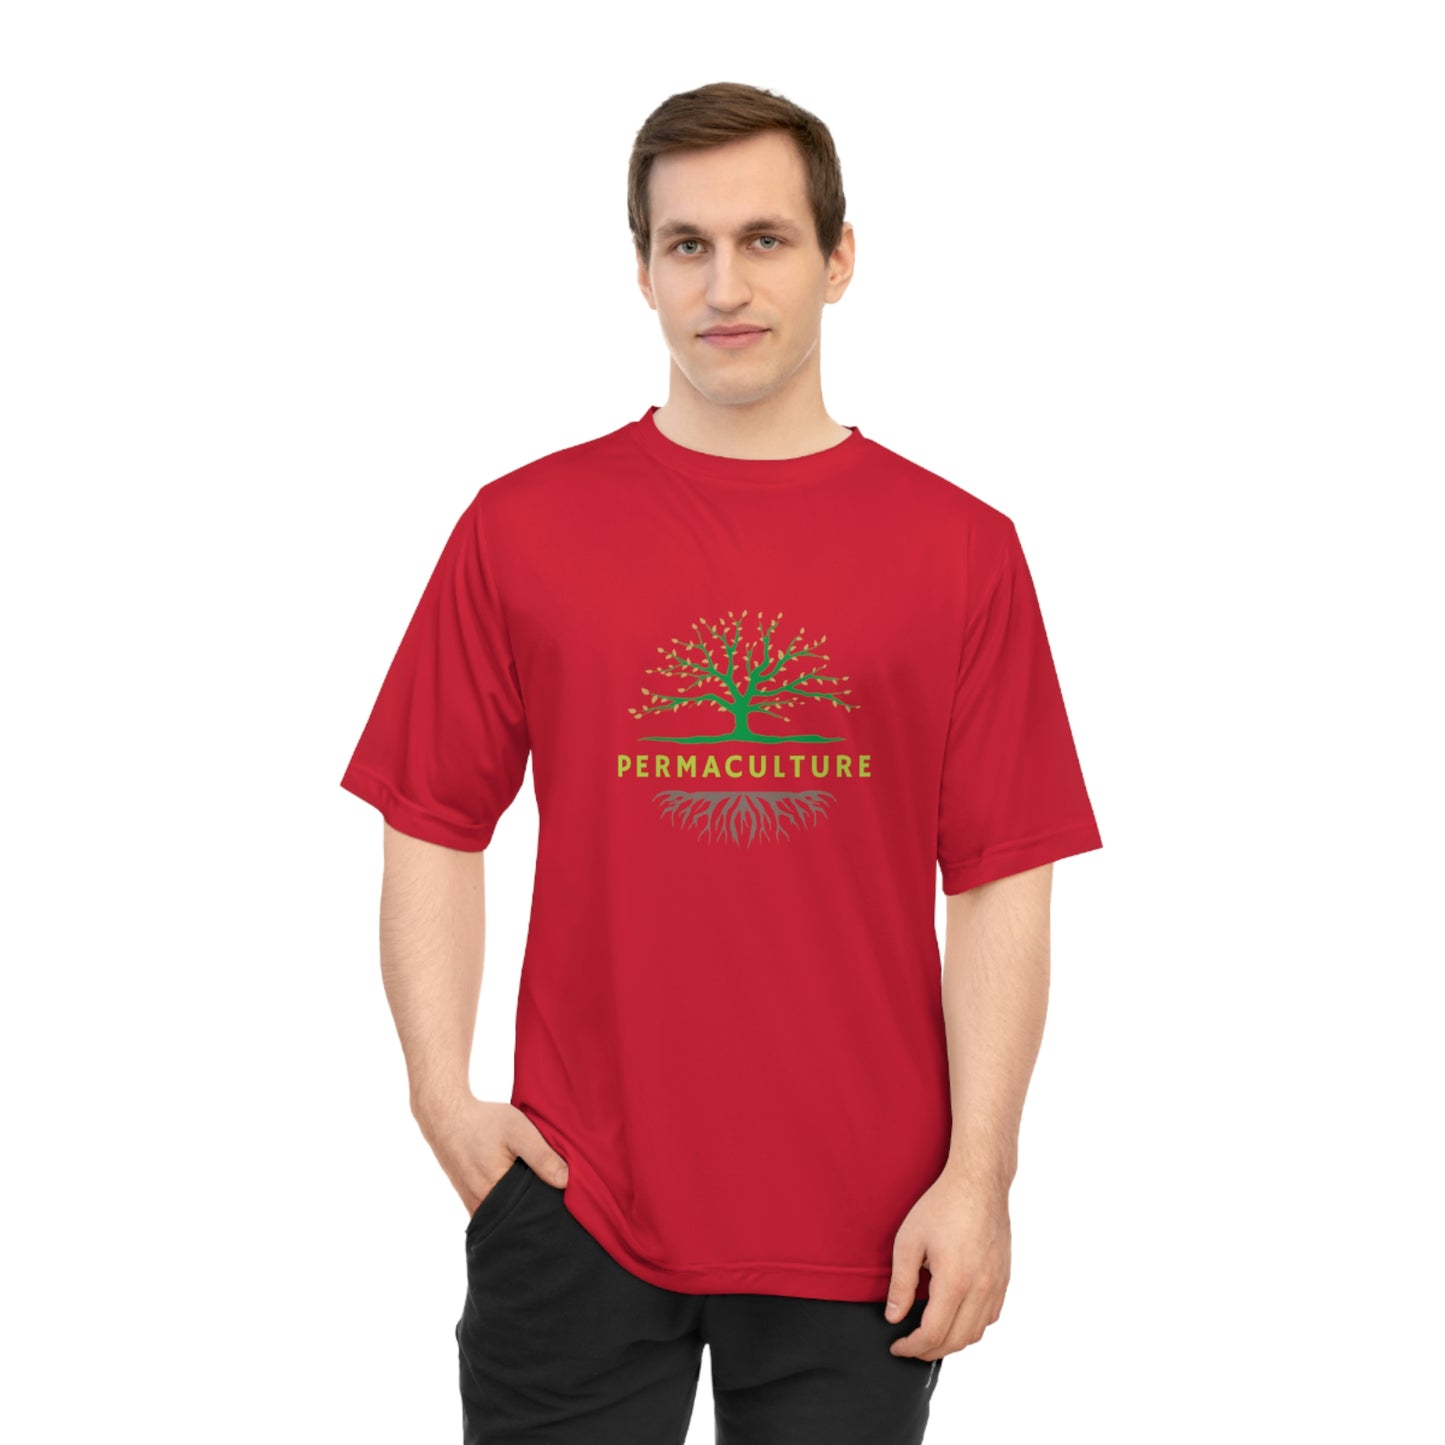 Permaculture - Unisex Zone Performance T-shirt